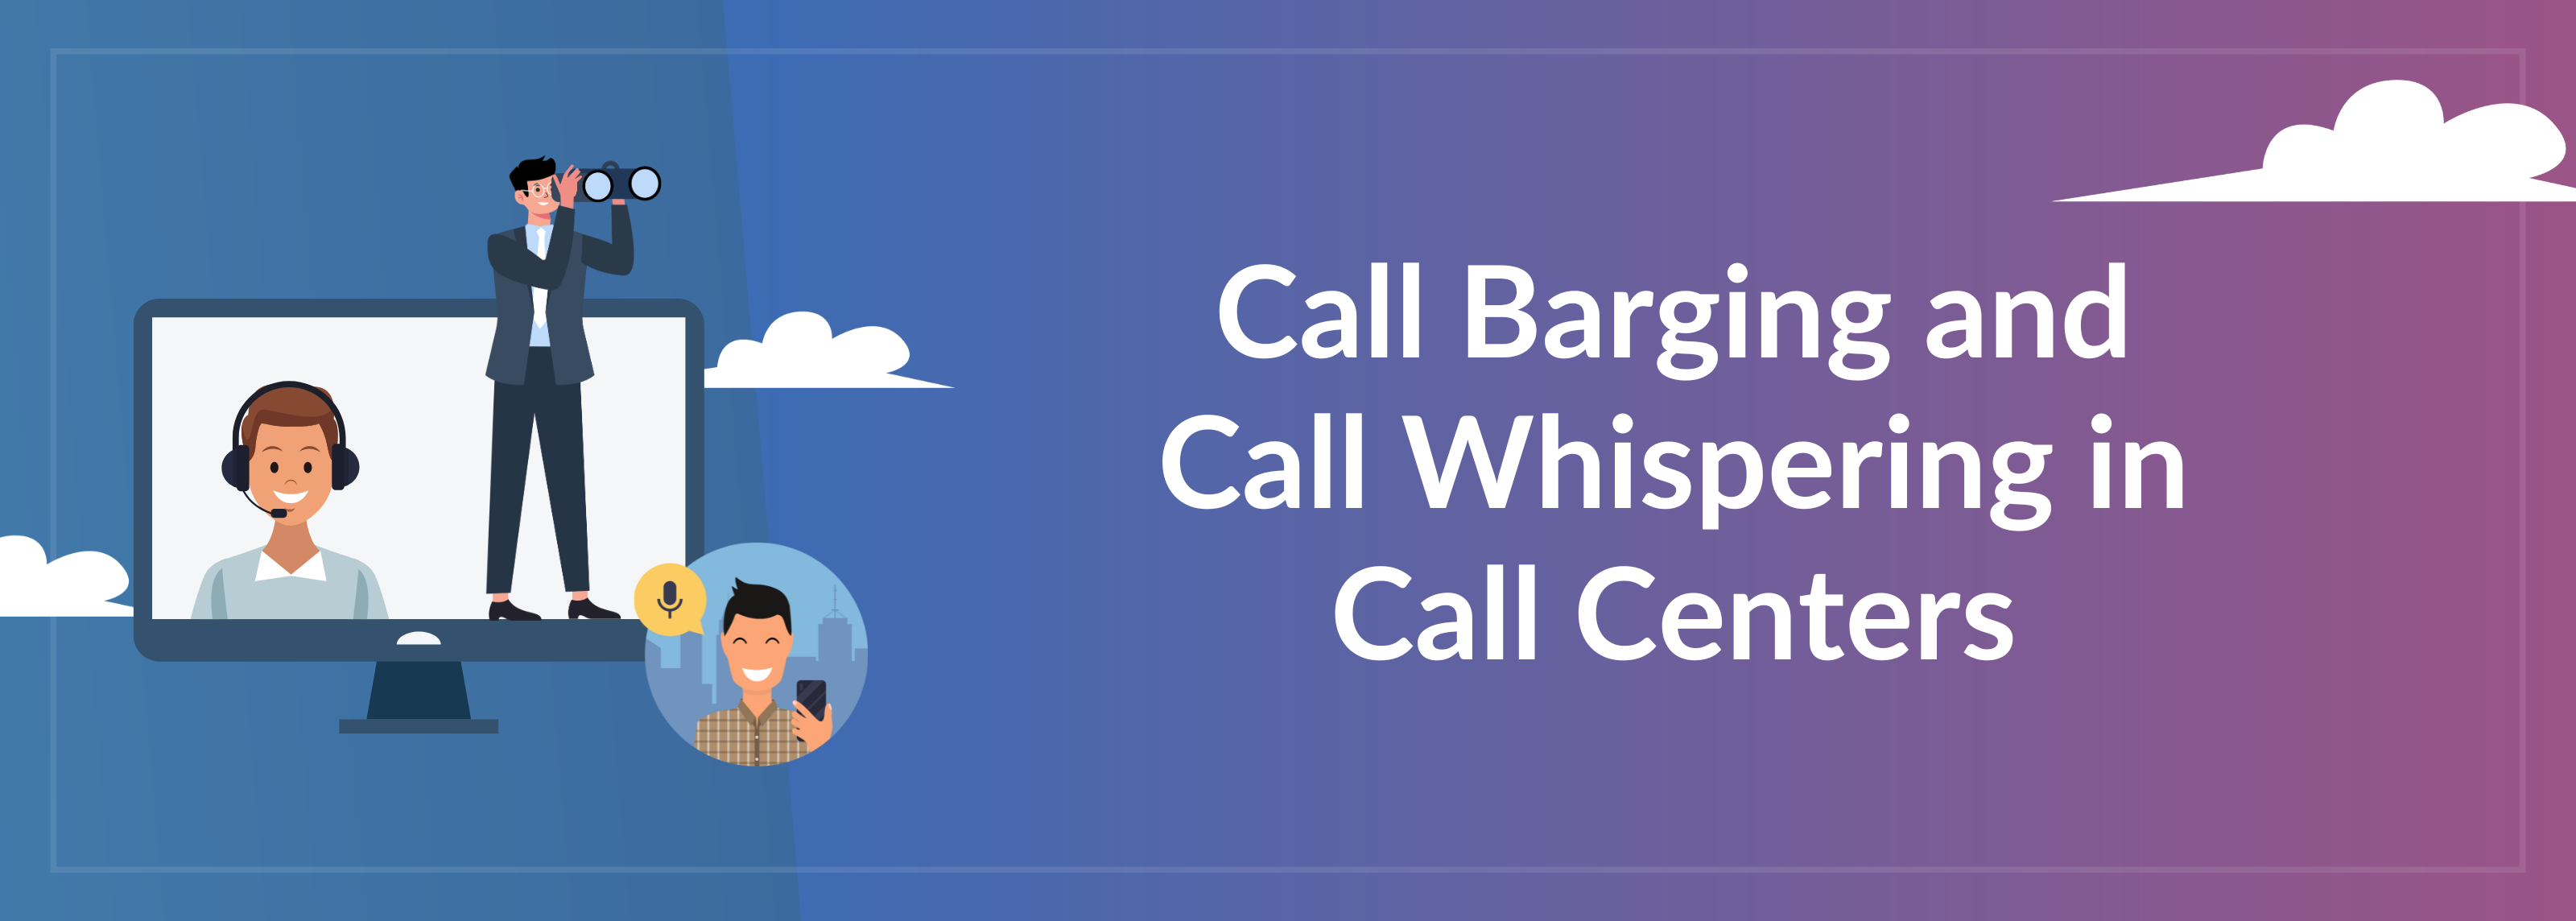 Call Barging and Call Whispering in Call Centers